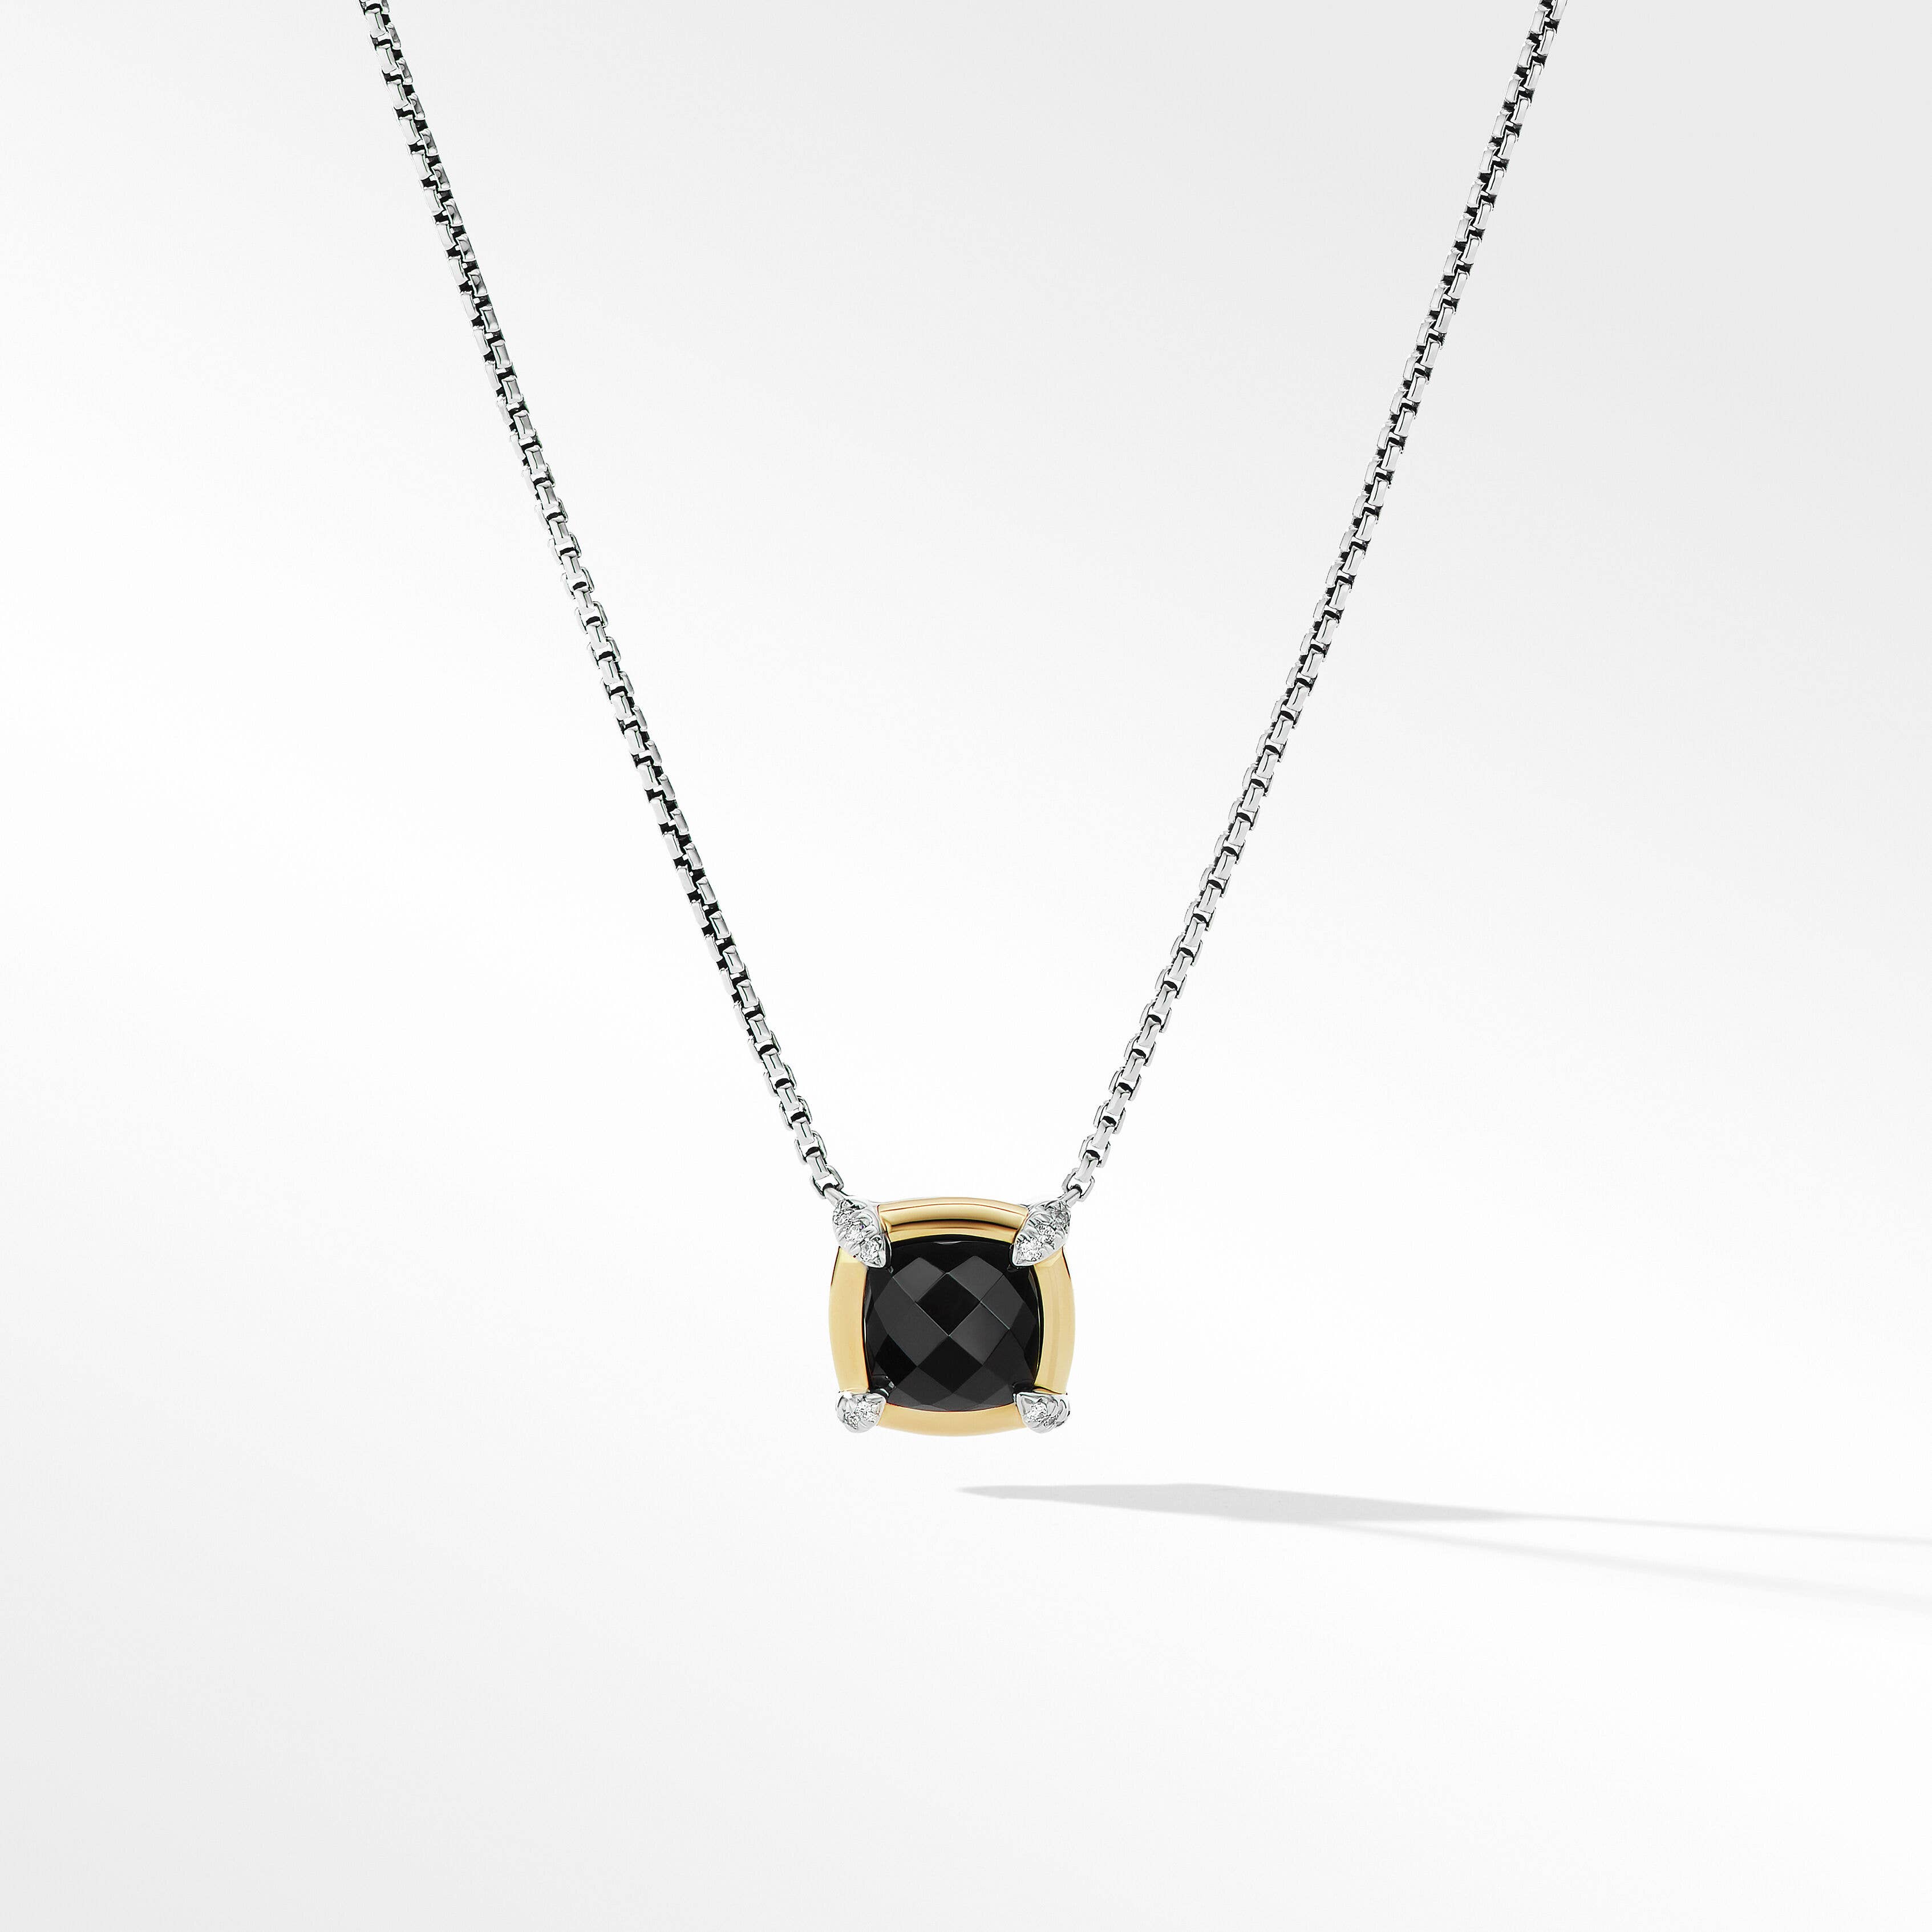 Petite Chatelaine® Pendant Necklace with Black Onyx, 18K Yellow Gold and Pavé Diamonds